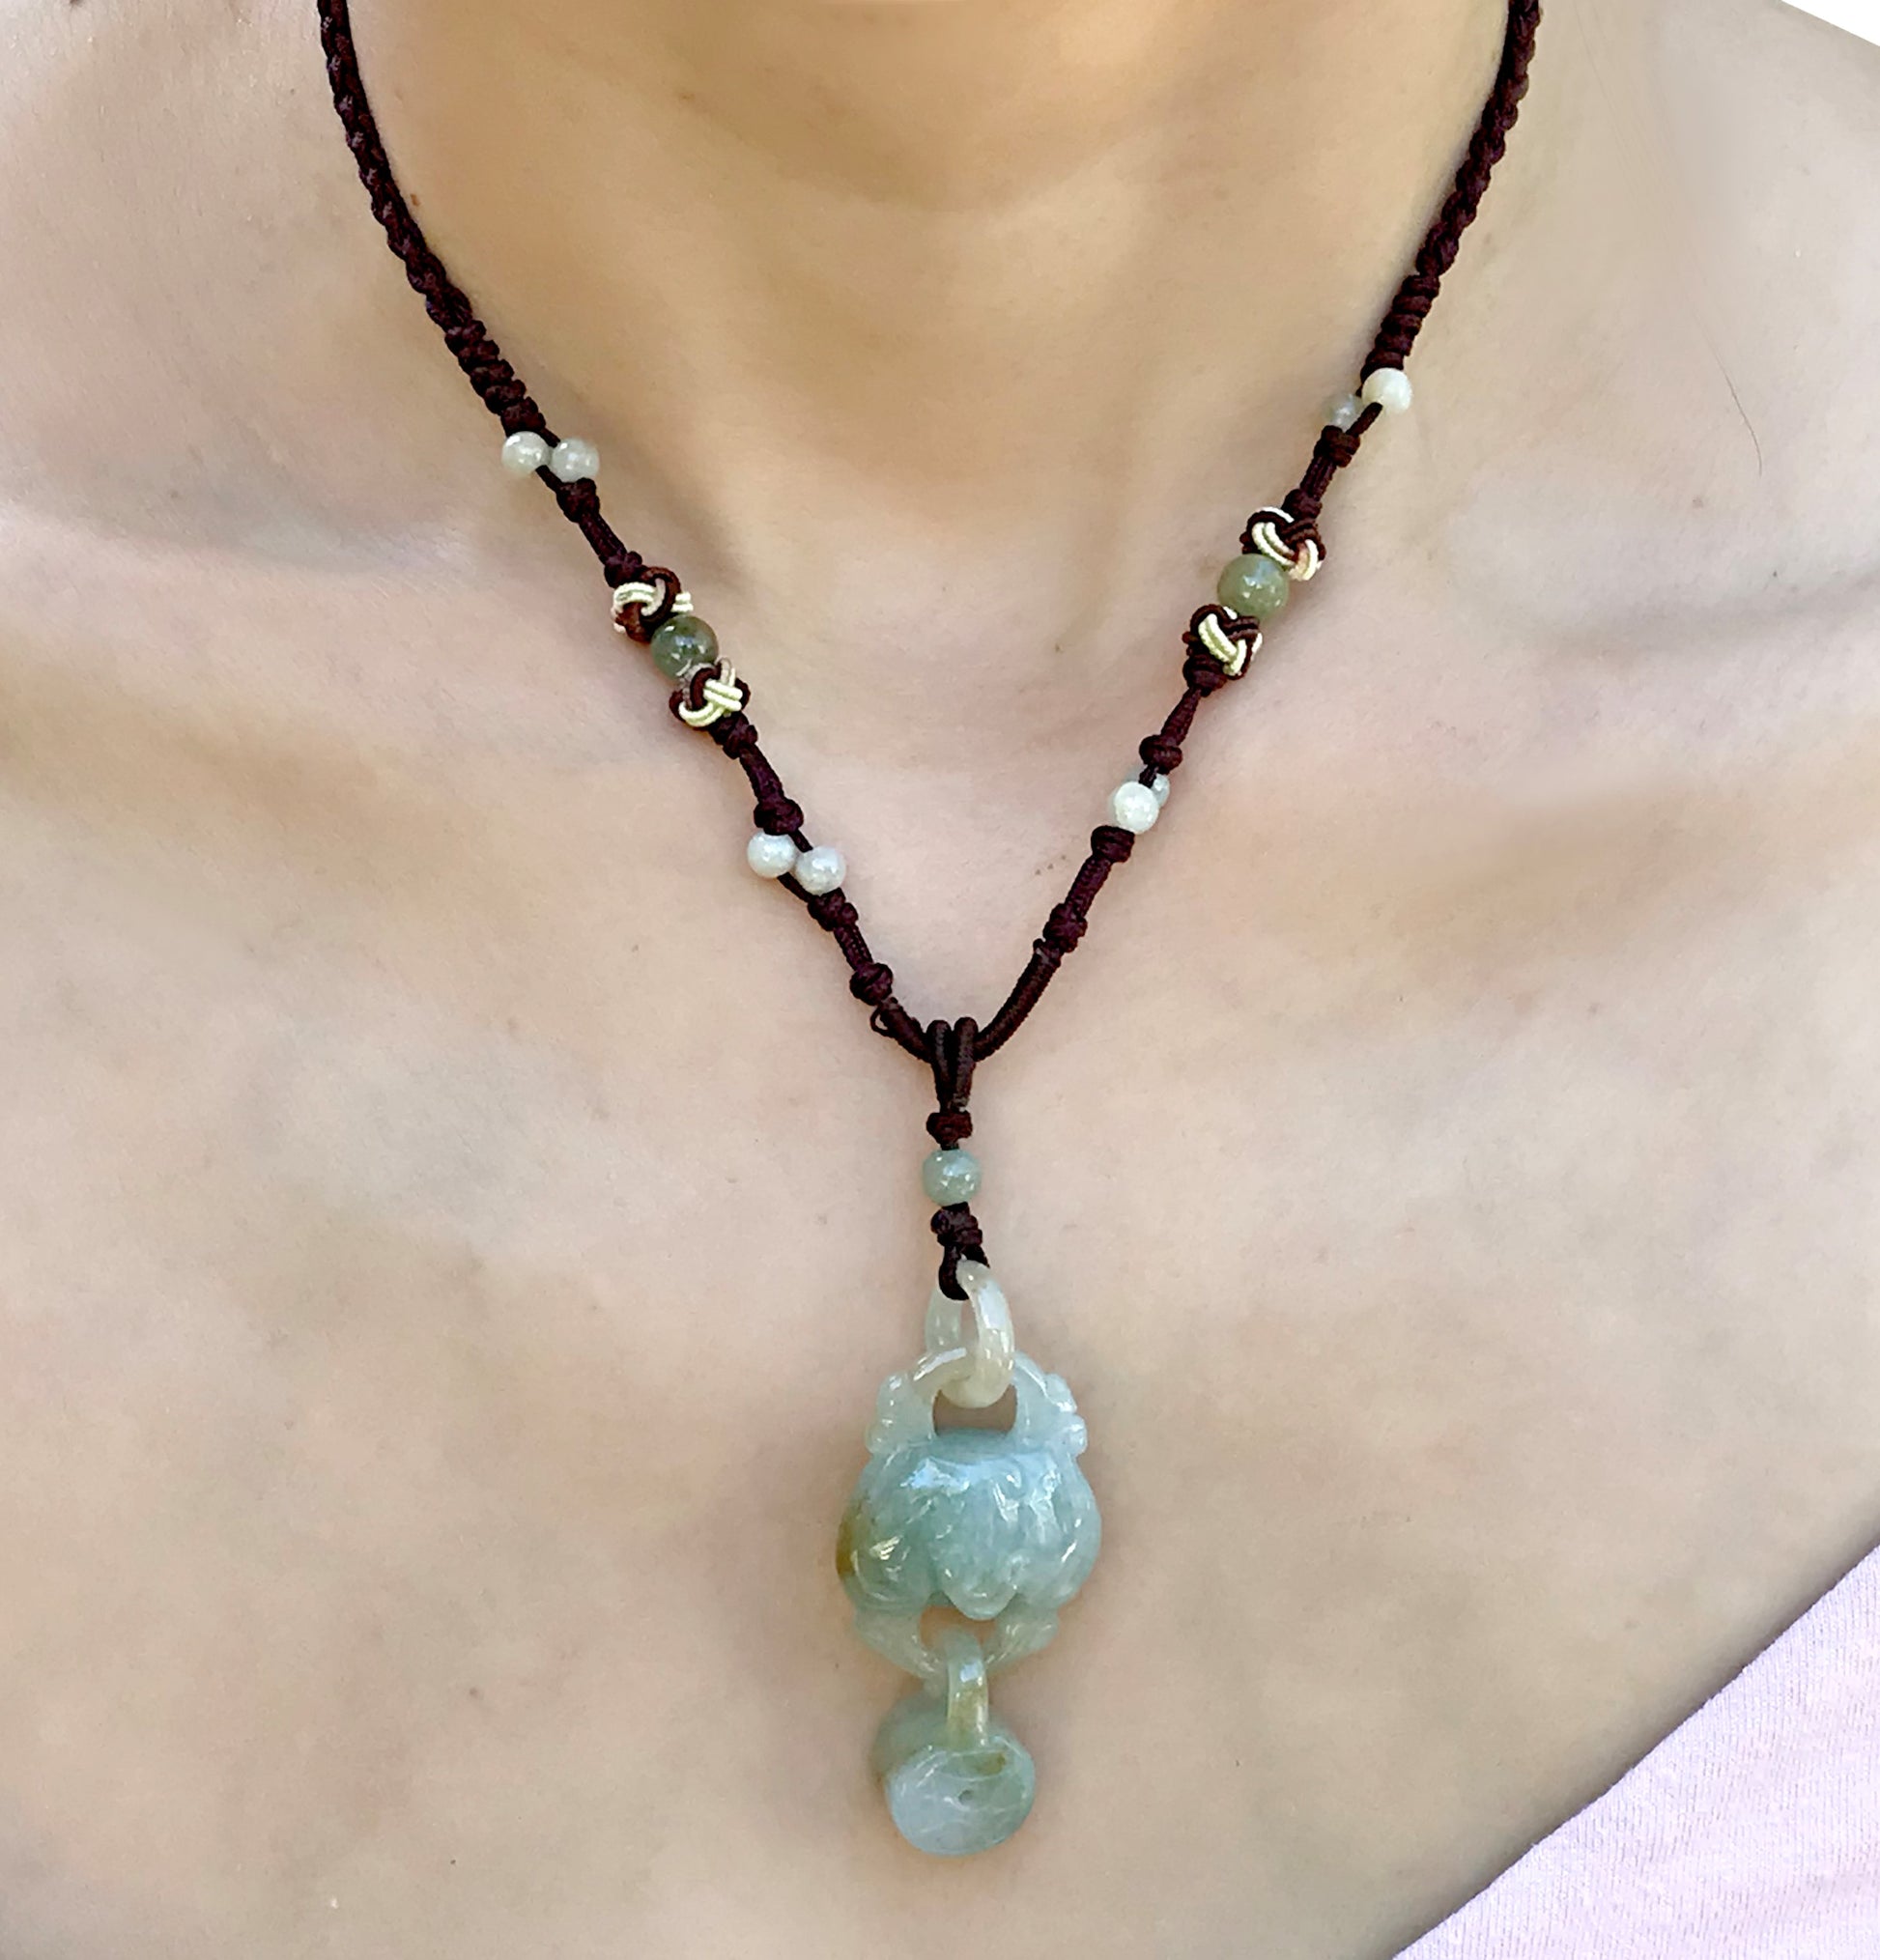 Be Lucky Every Day with the Bat Handmade Jade Necklace